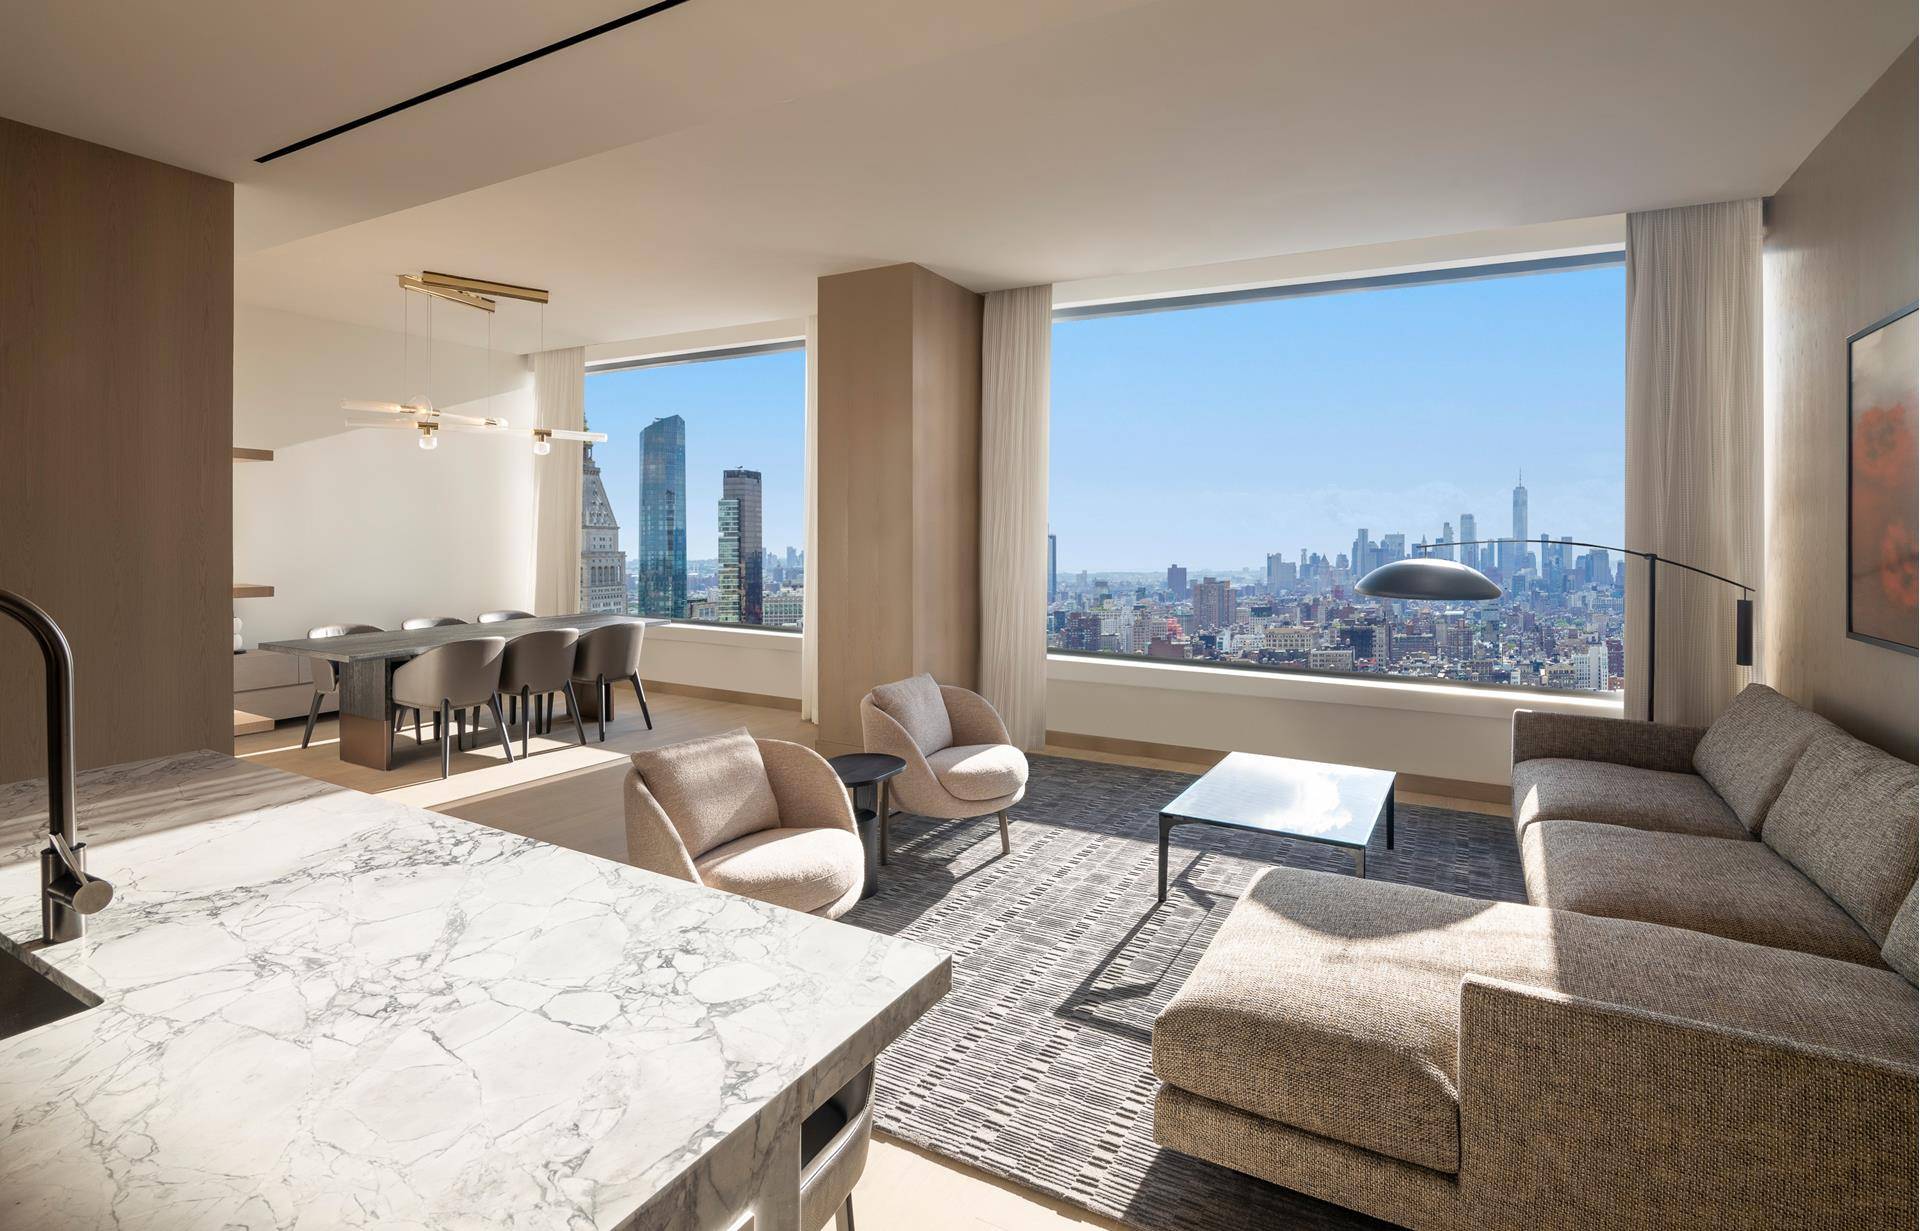 The Very Last Penthouse Residence atop The New Ritz Carlton Hotel, New York, NoMadSoaring nearly 500 feet above Manhattan's iconic skyline, and at the very top of the newest tower ...